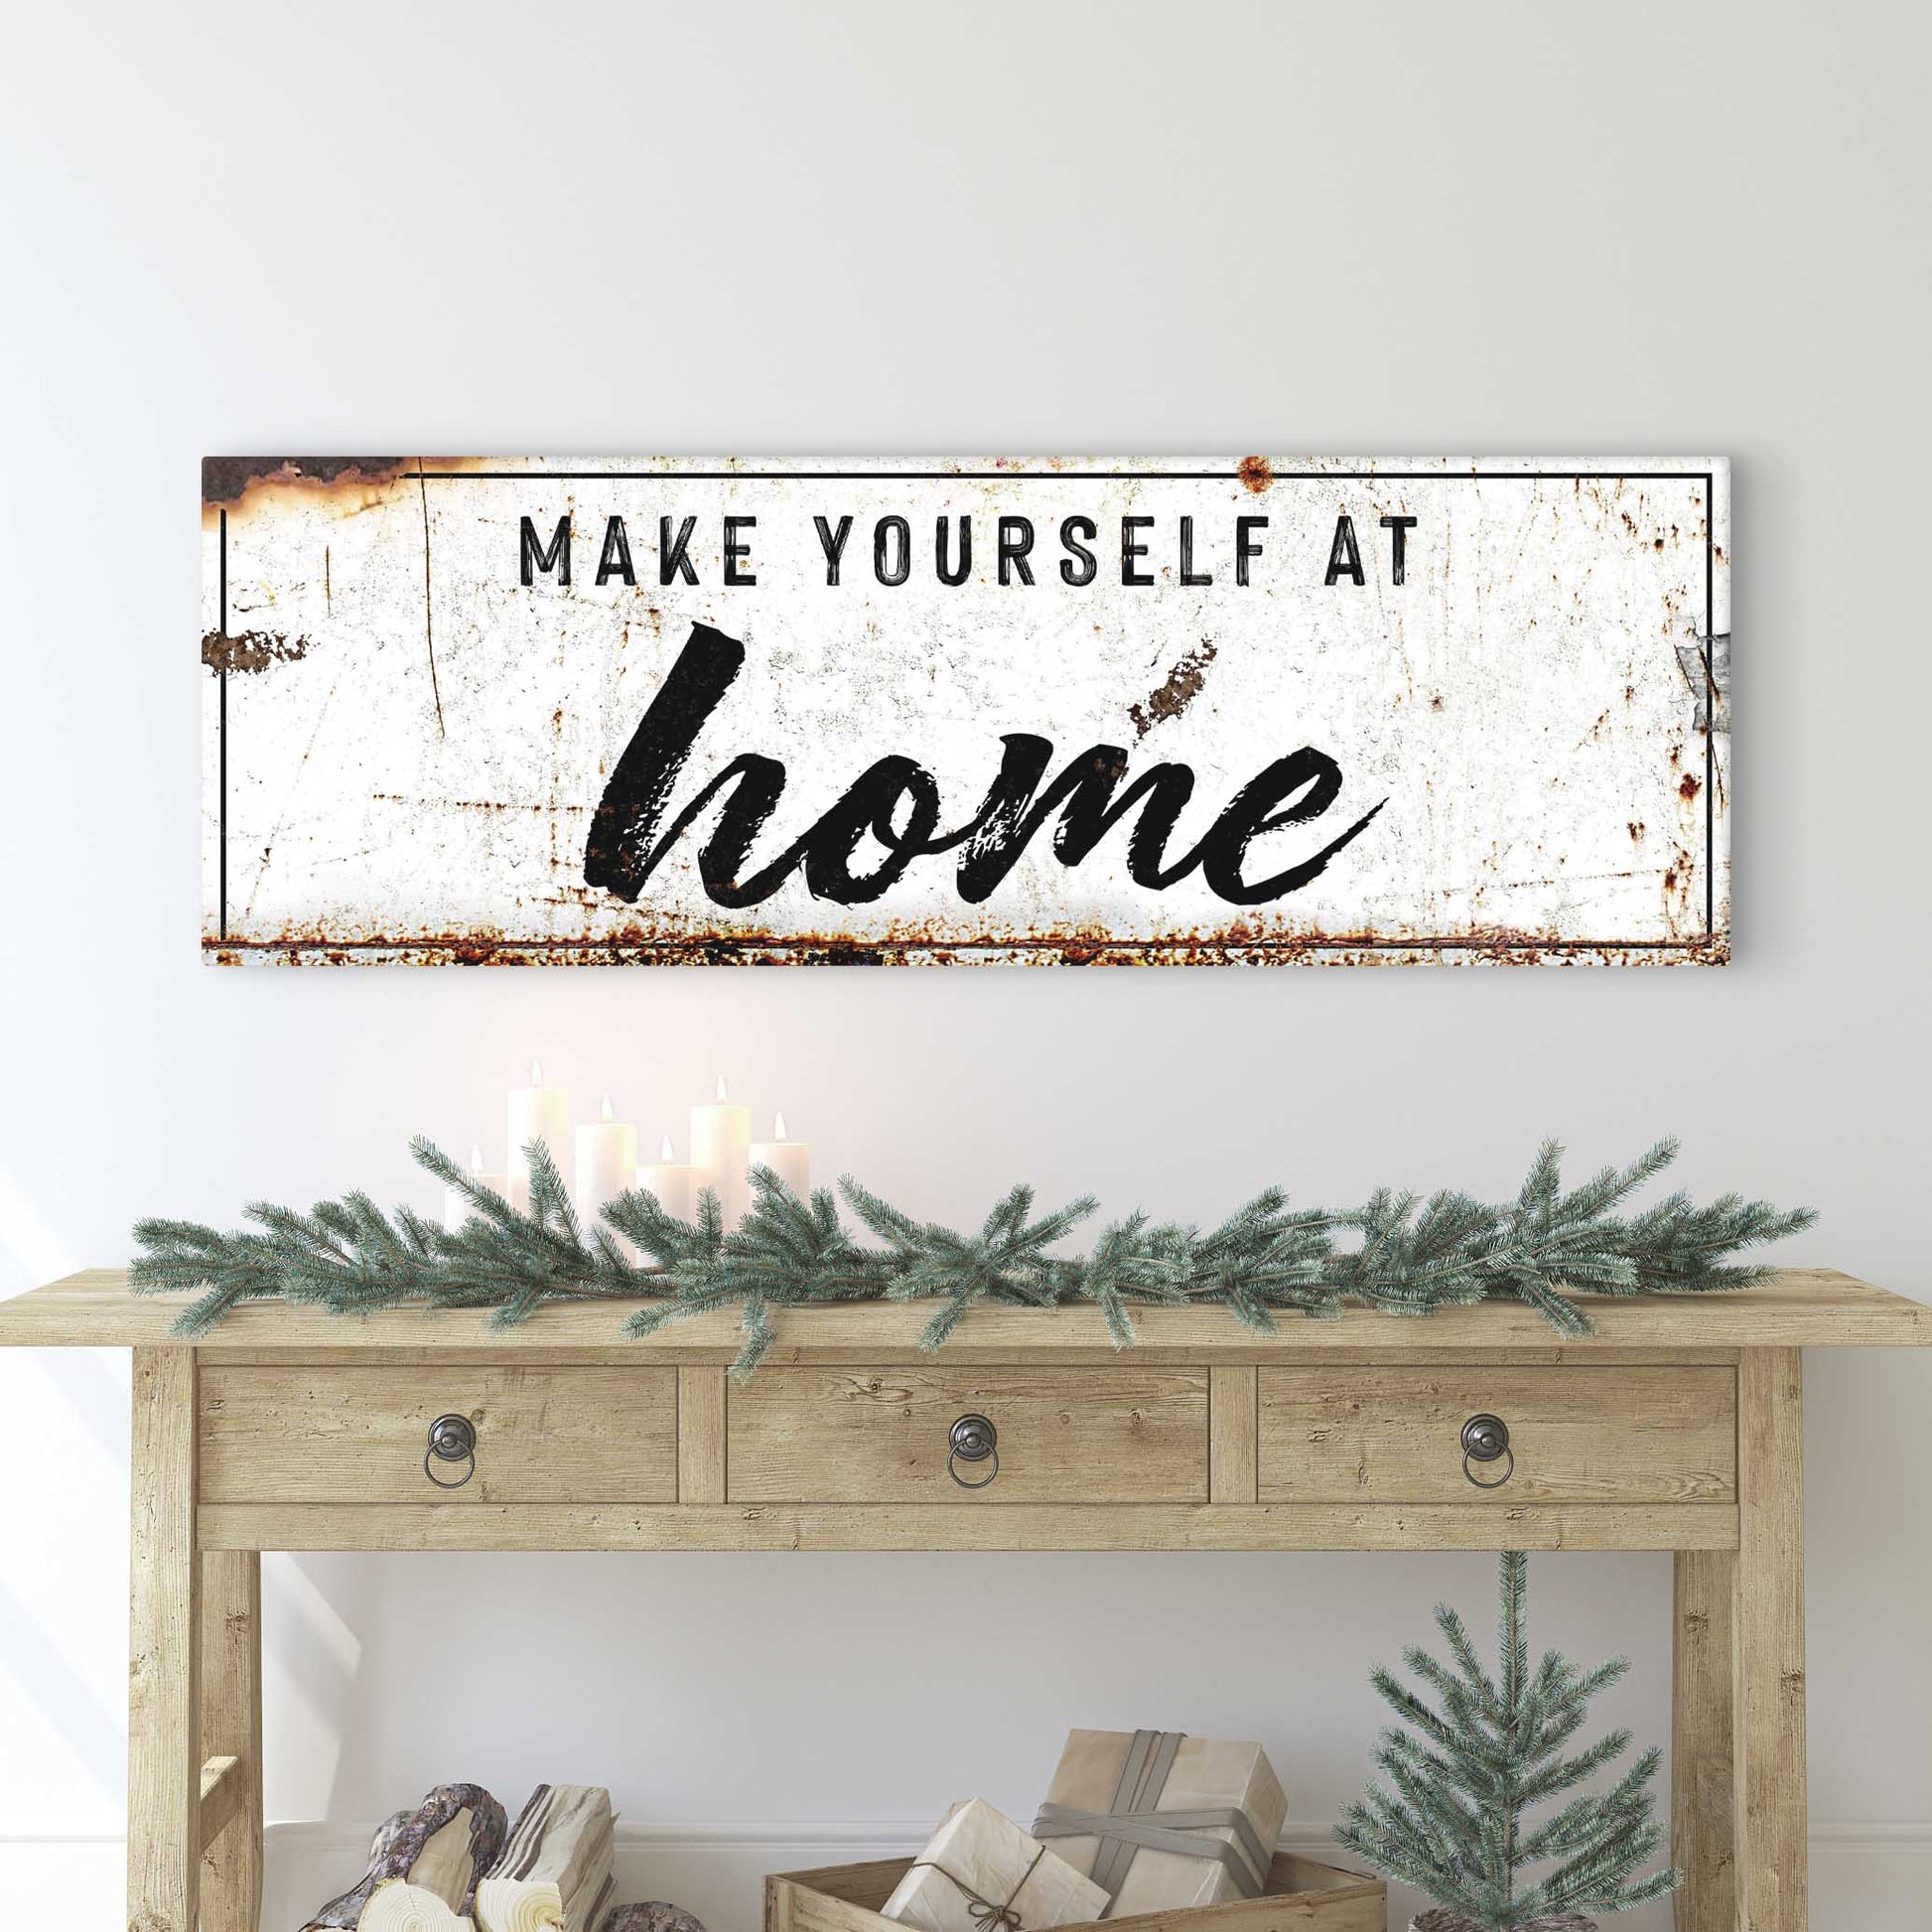 Make Yourself at Home Rustic Sign - Image by Tailored Canvases